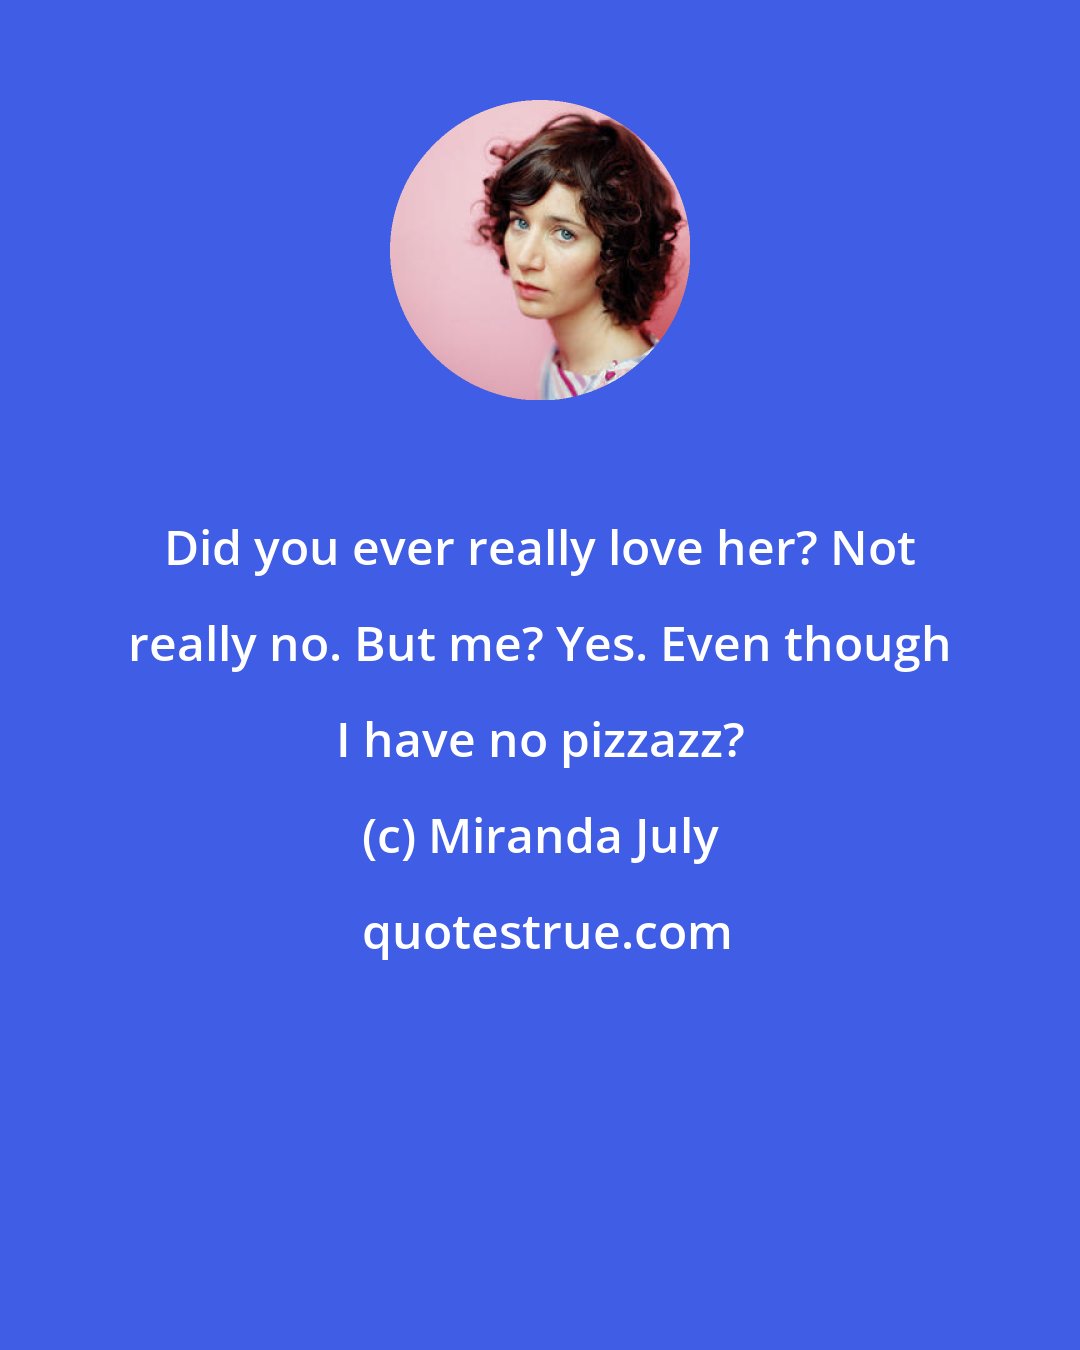 Miranda July: Did you ever really love her? Not really no. But me? Yes. Even though I have no pizzazz?